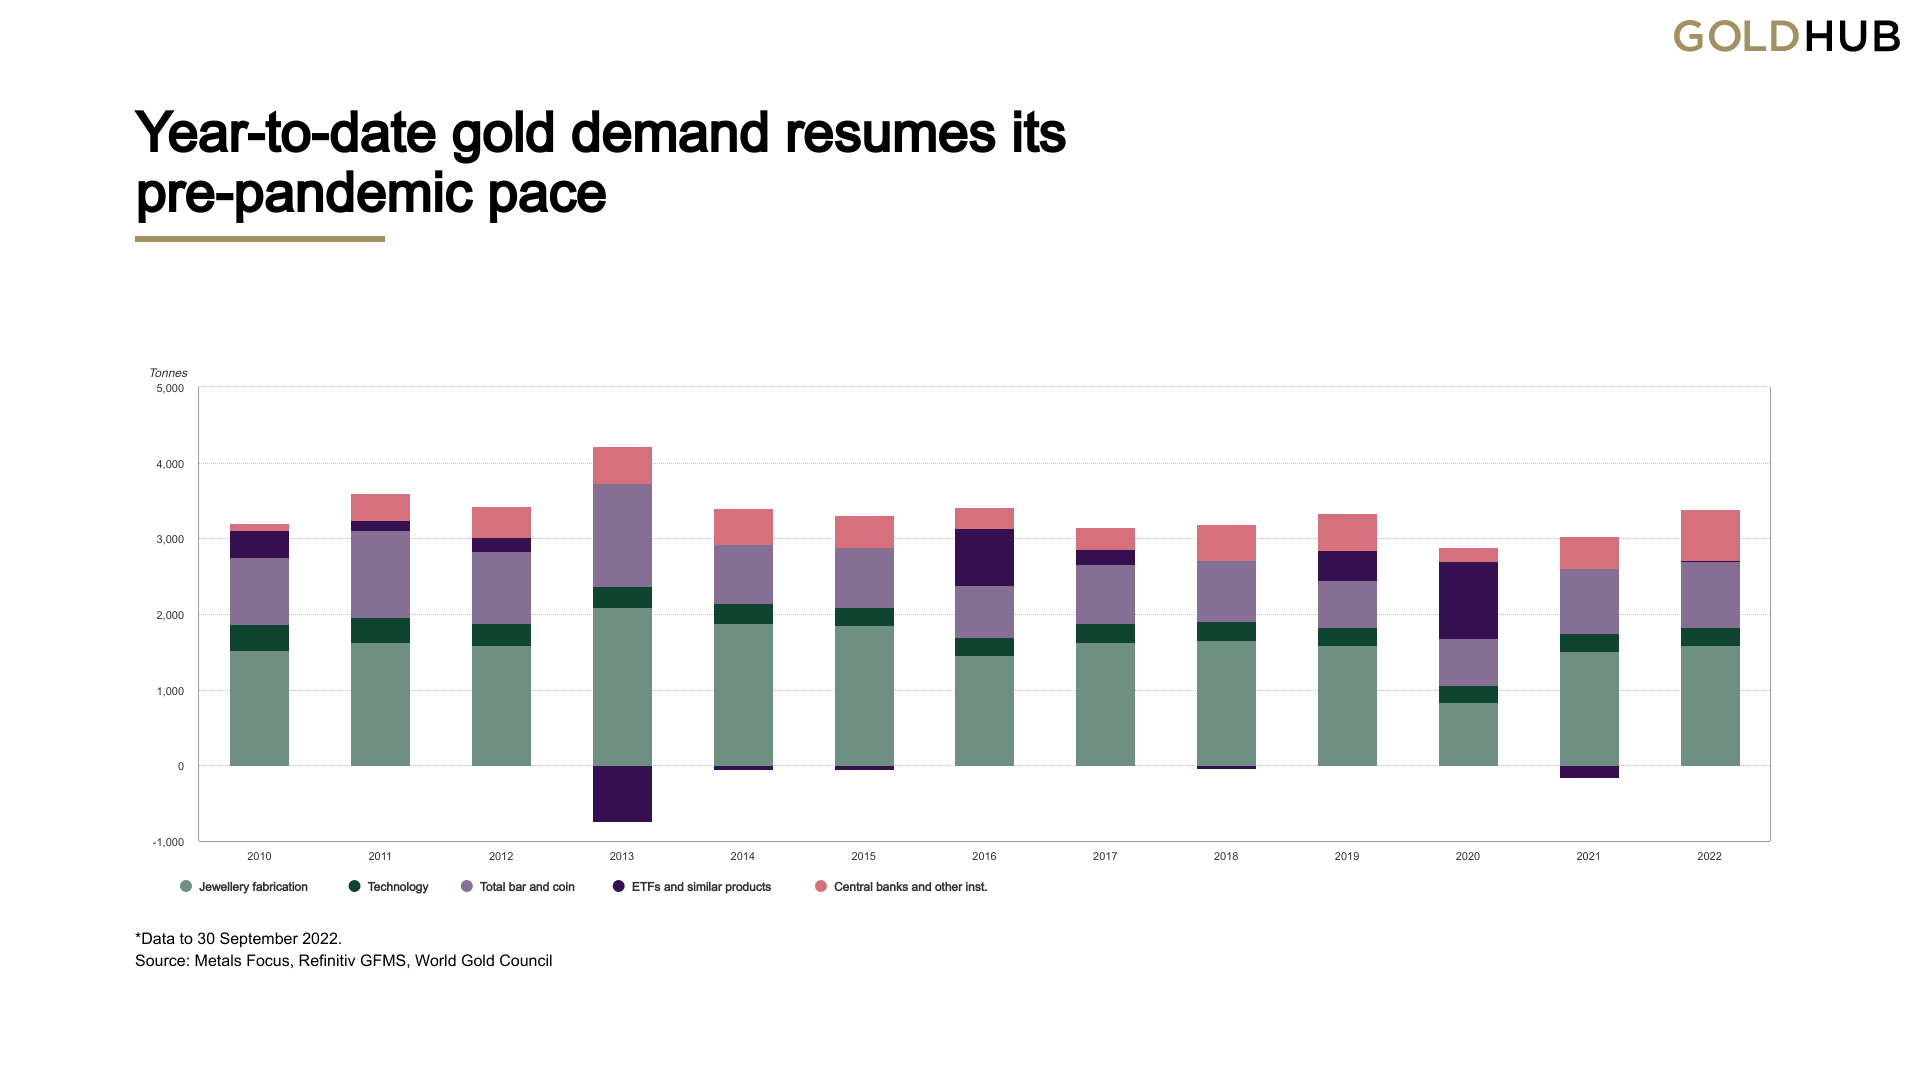 Central Bank Gold Buys This Year Reach an All-Time Quarterly High in Q3, 400 Tons Purchased Is the 'Most on Record